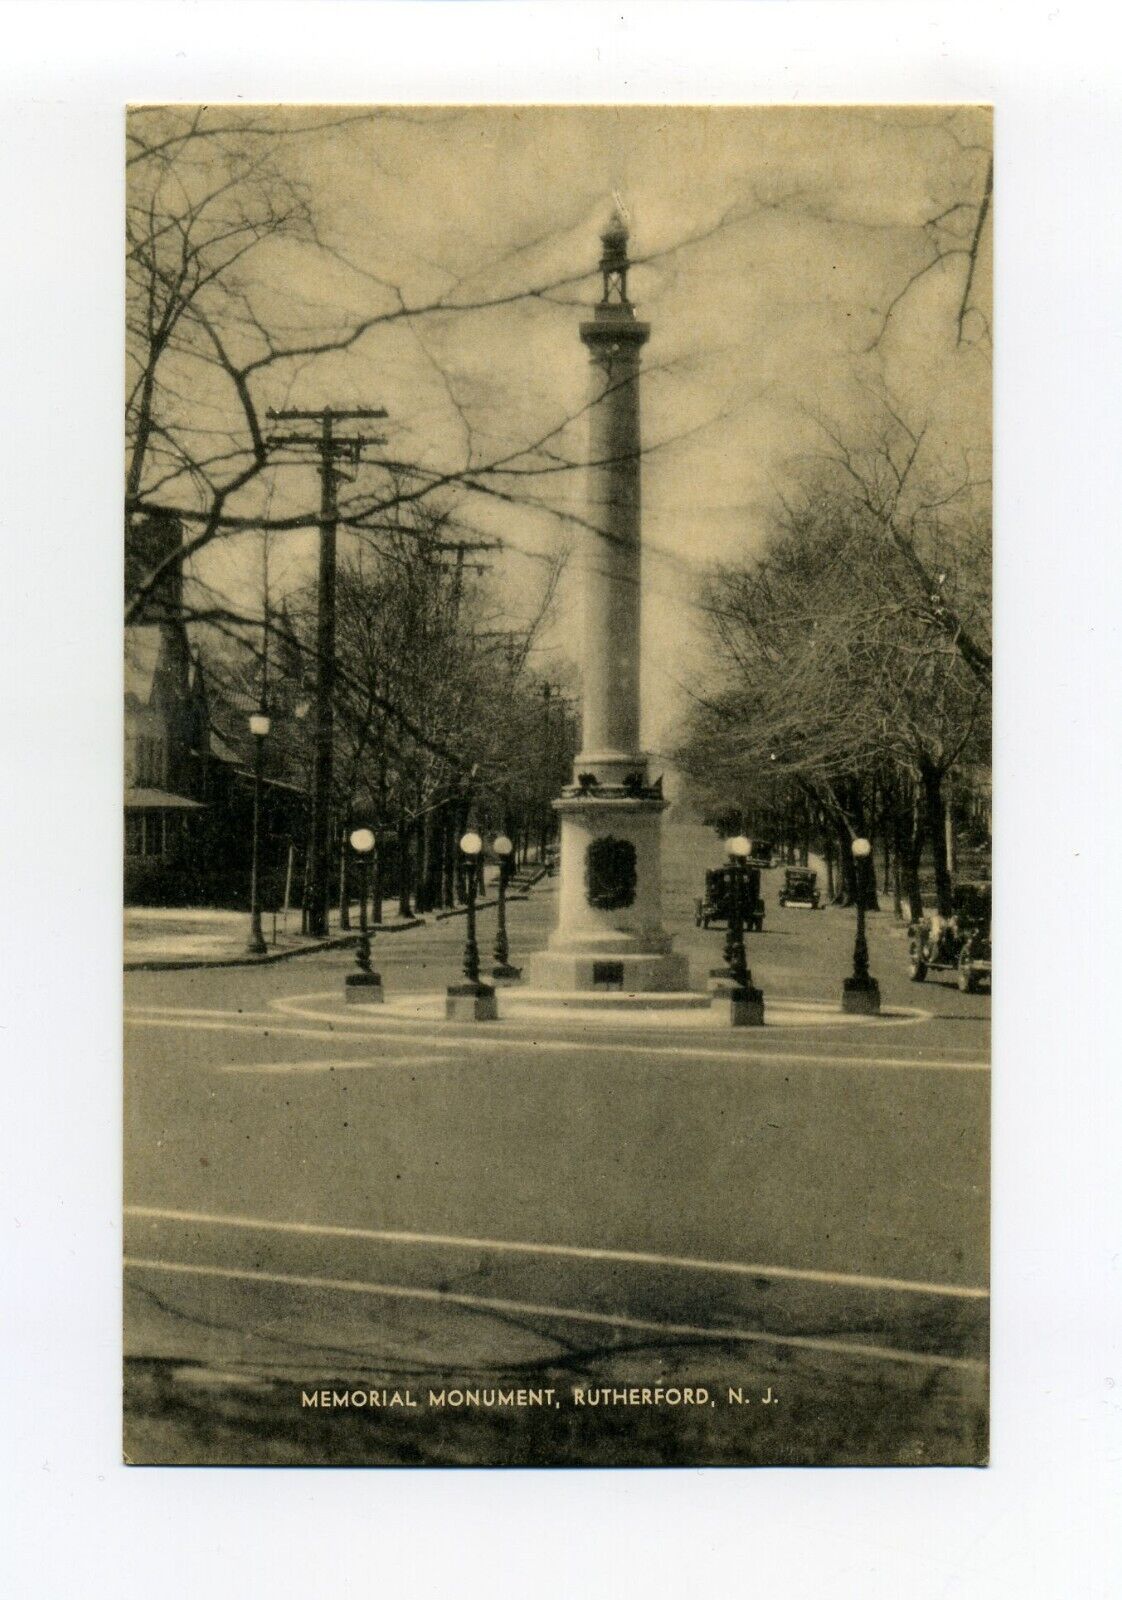 Rutherford NJ (Bergen Co) WWI Monument, street view, old cars, vintage postcard